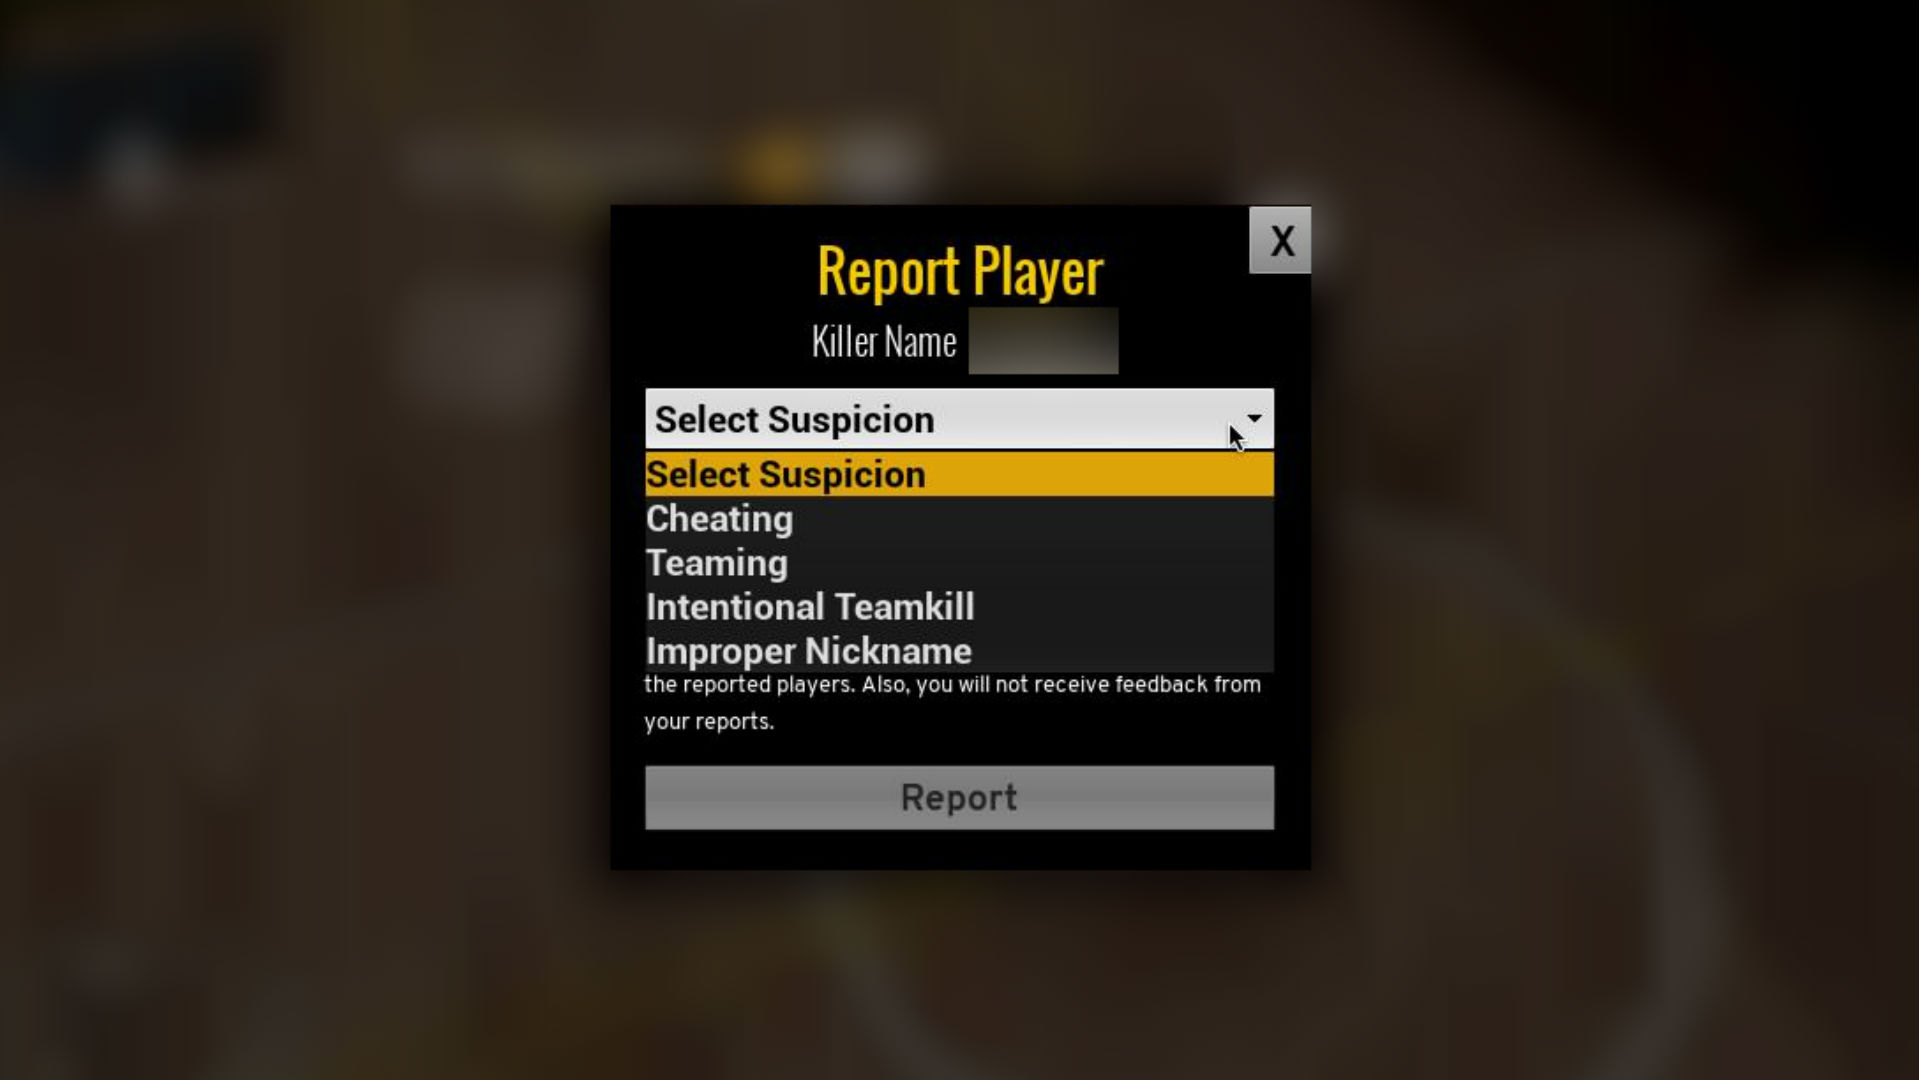 Player reports